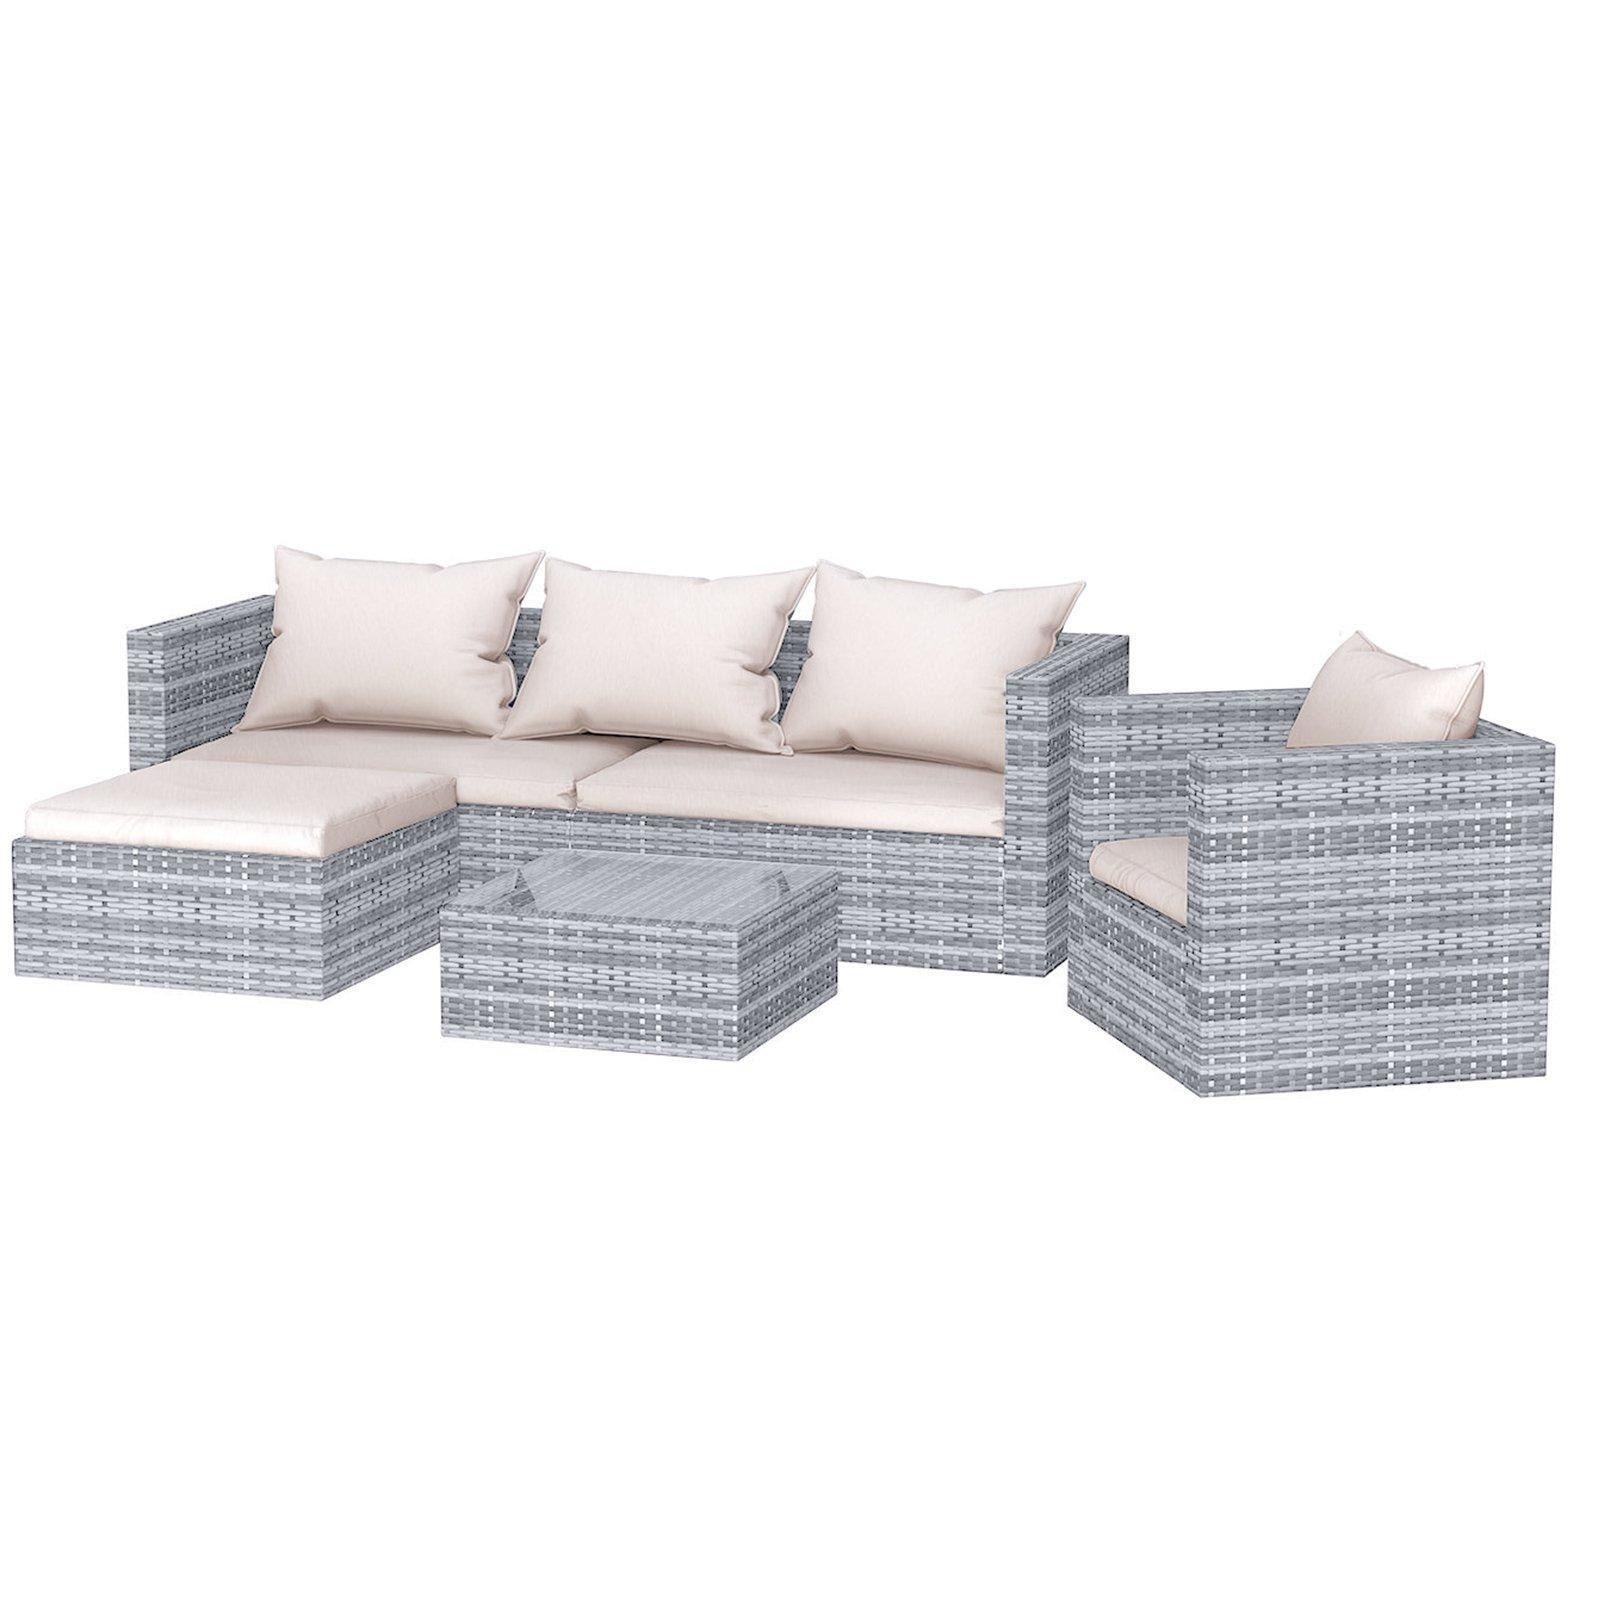 5-Seater Garden Furniture Sofa Table Chairs Set,Modular Corner Rattan Sofa with Cushions and Glass Table - image 1